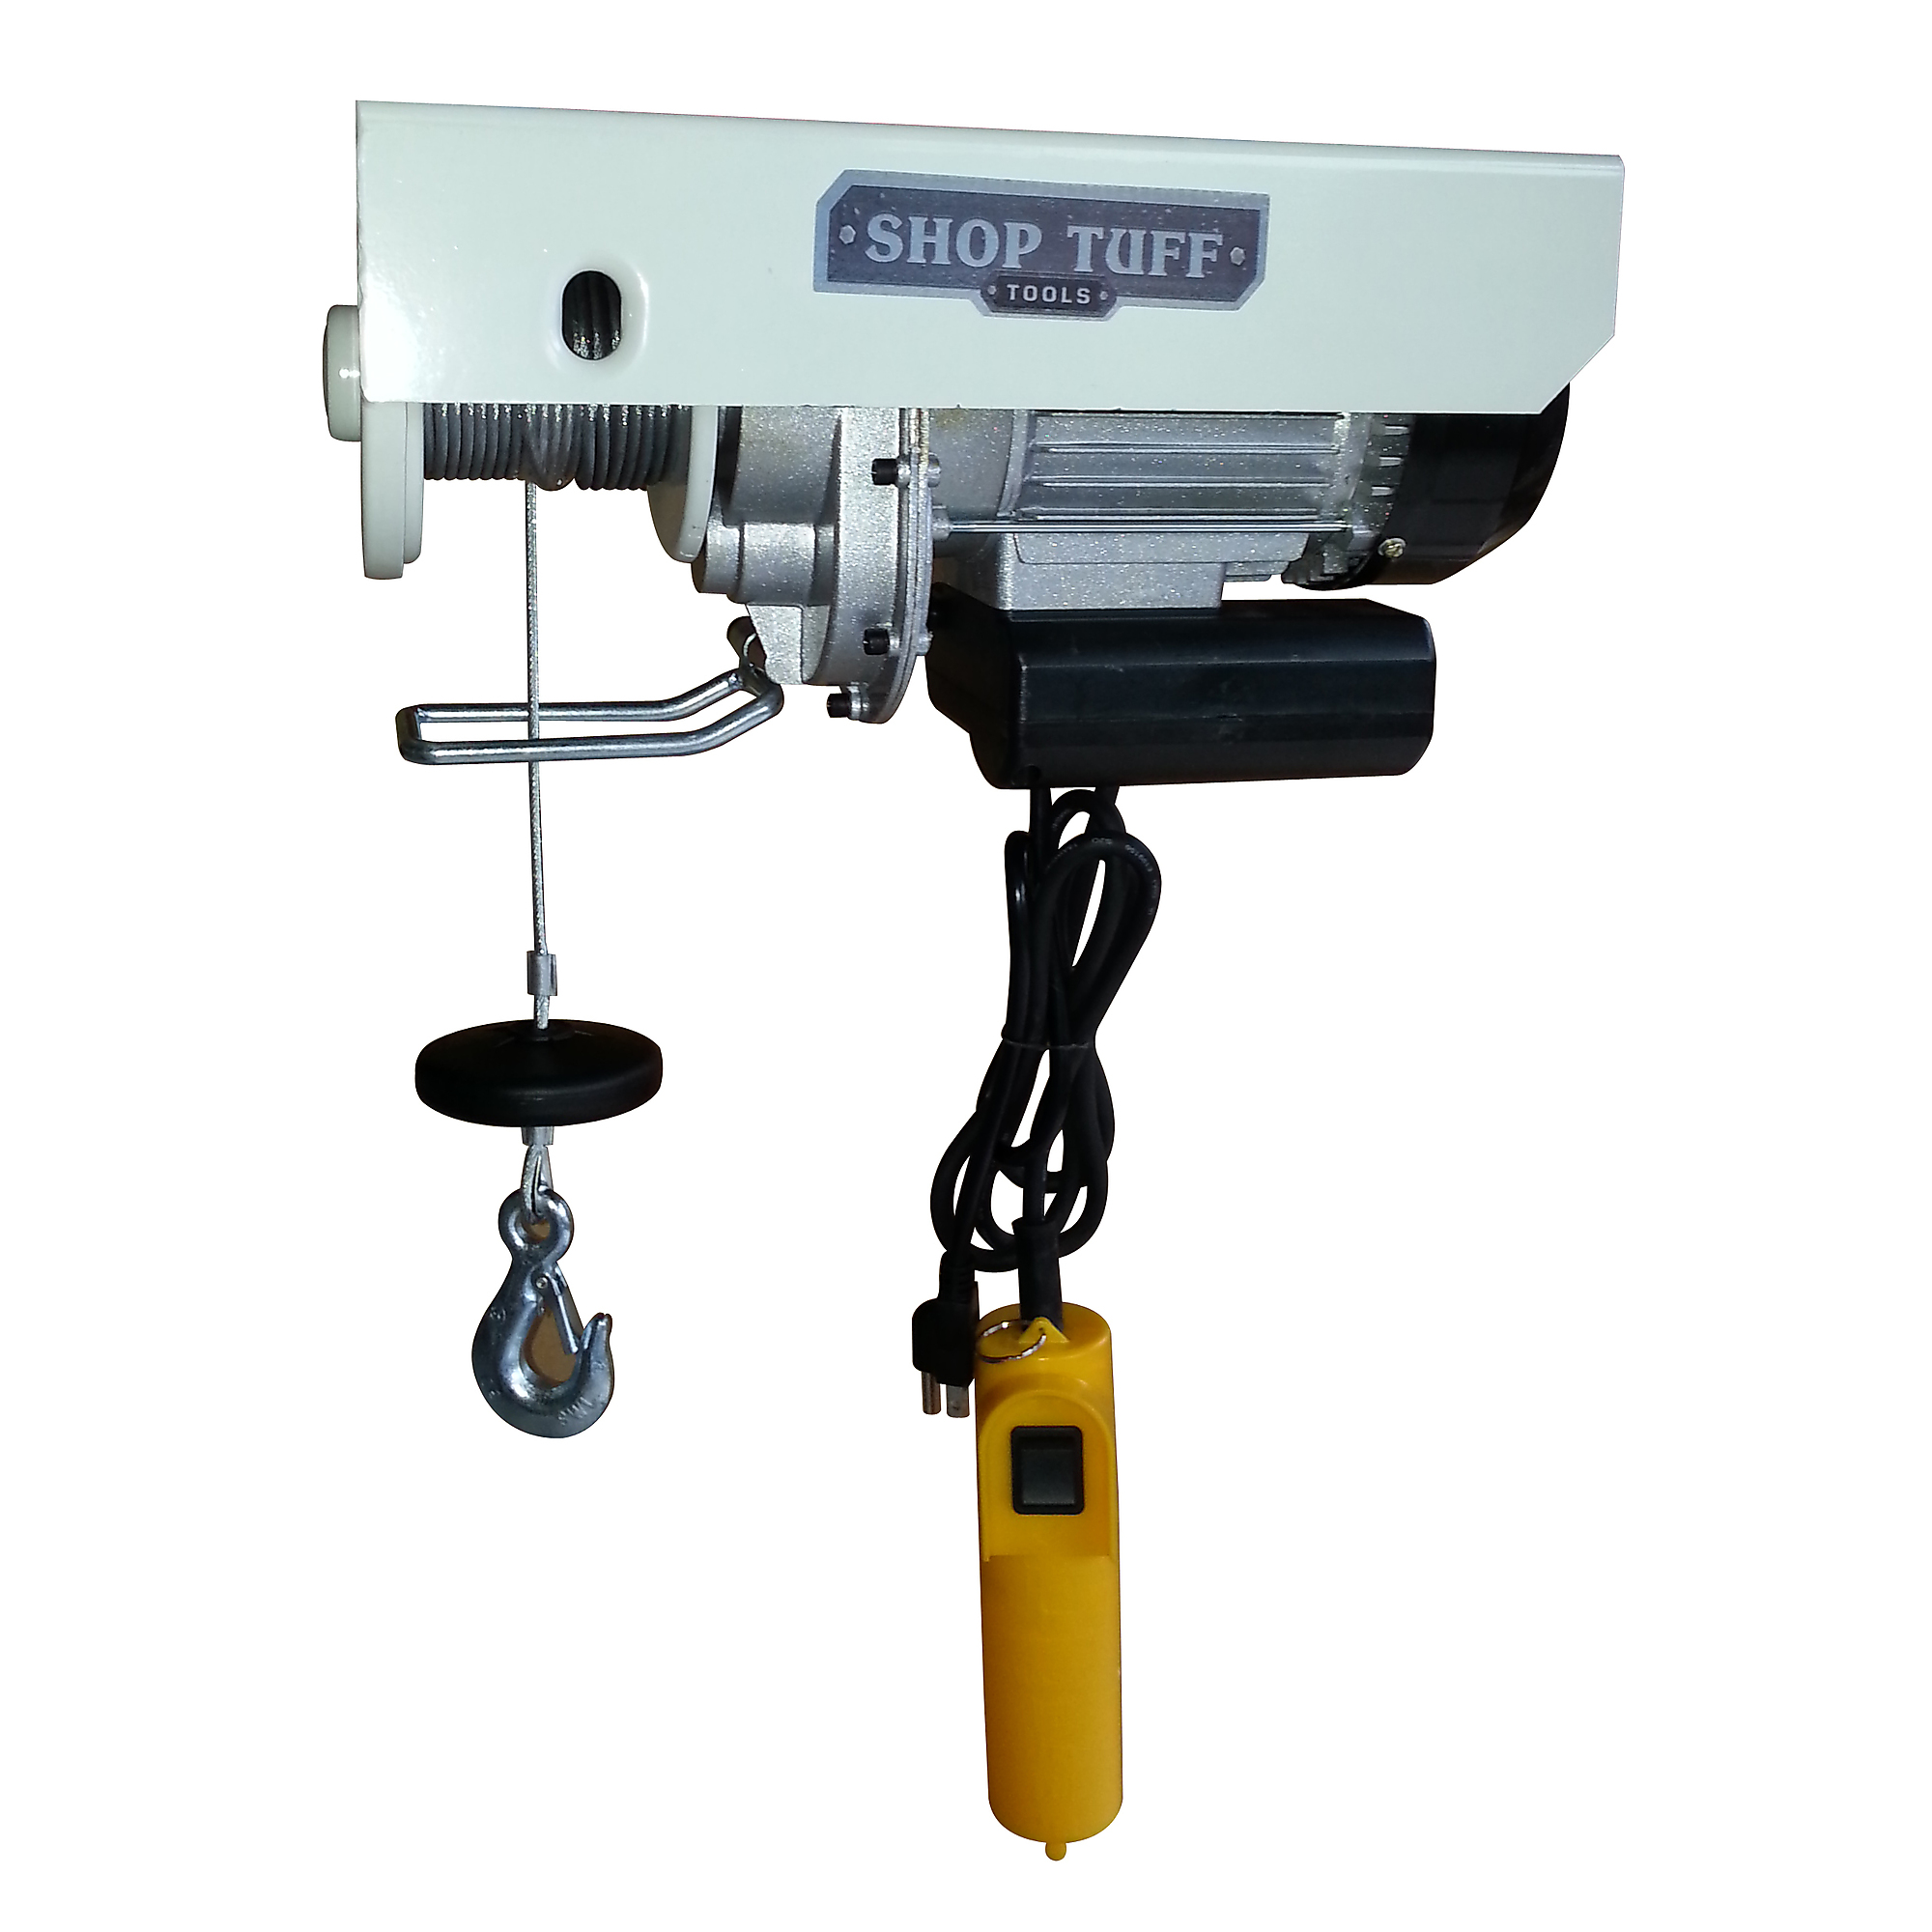 Shop Tuff, Electric Cable Hoist, Amps 10, Single Line Lift Capacity 550 lb, Double Line Lift Capacity 1100 lb, Model STF-5511EH